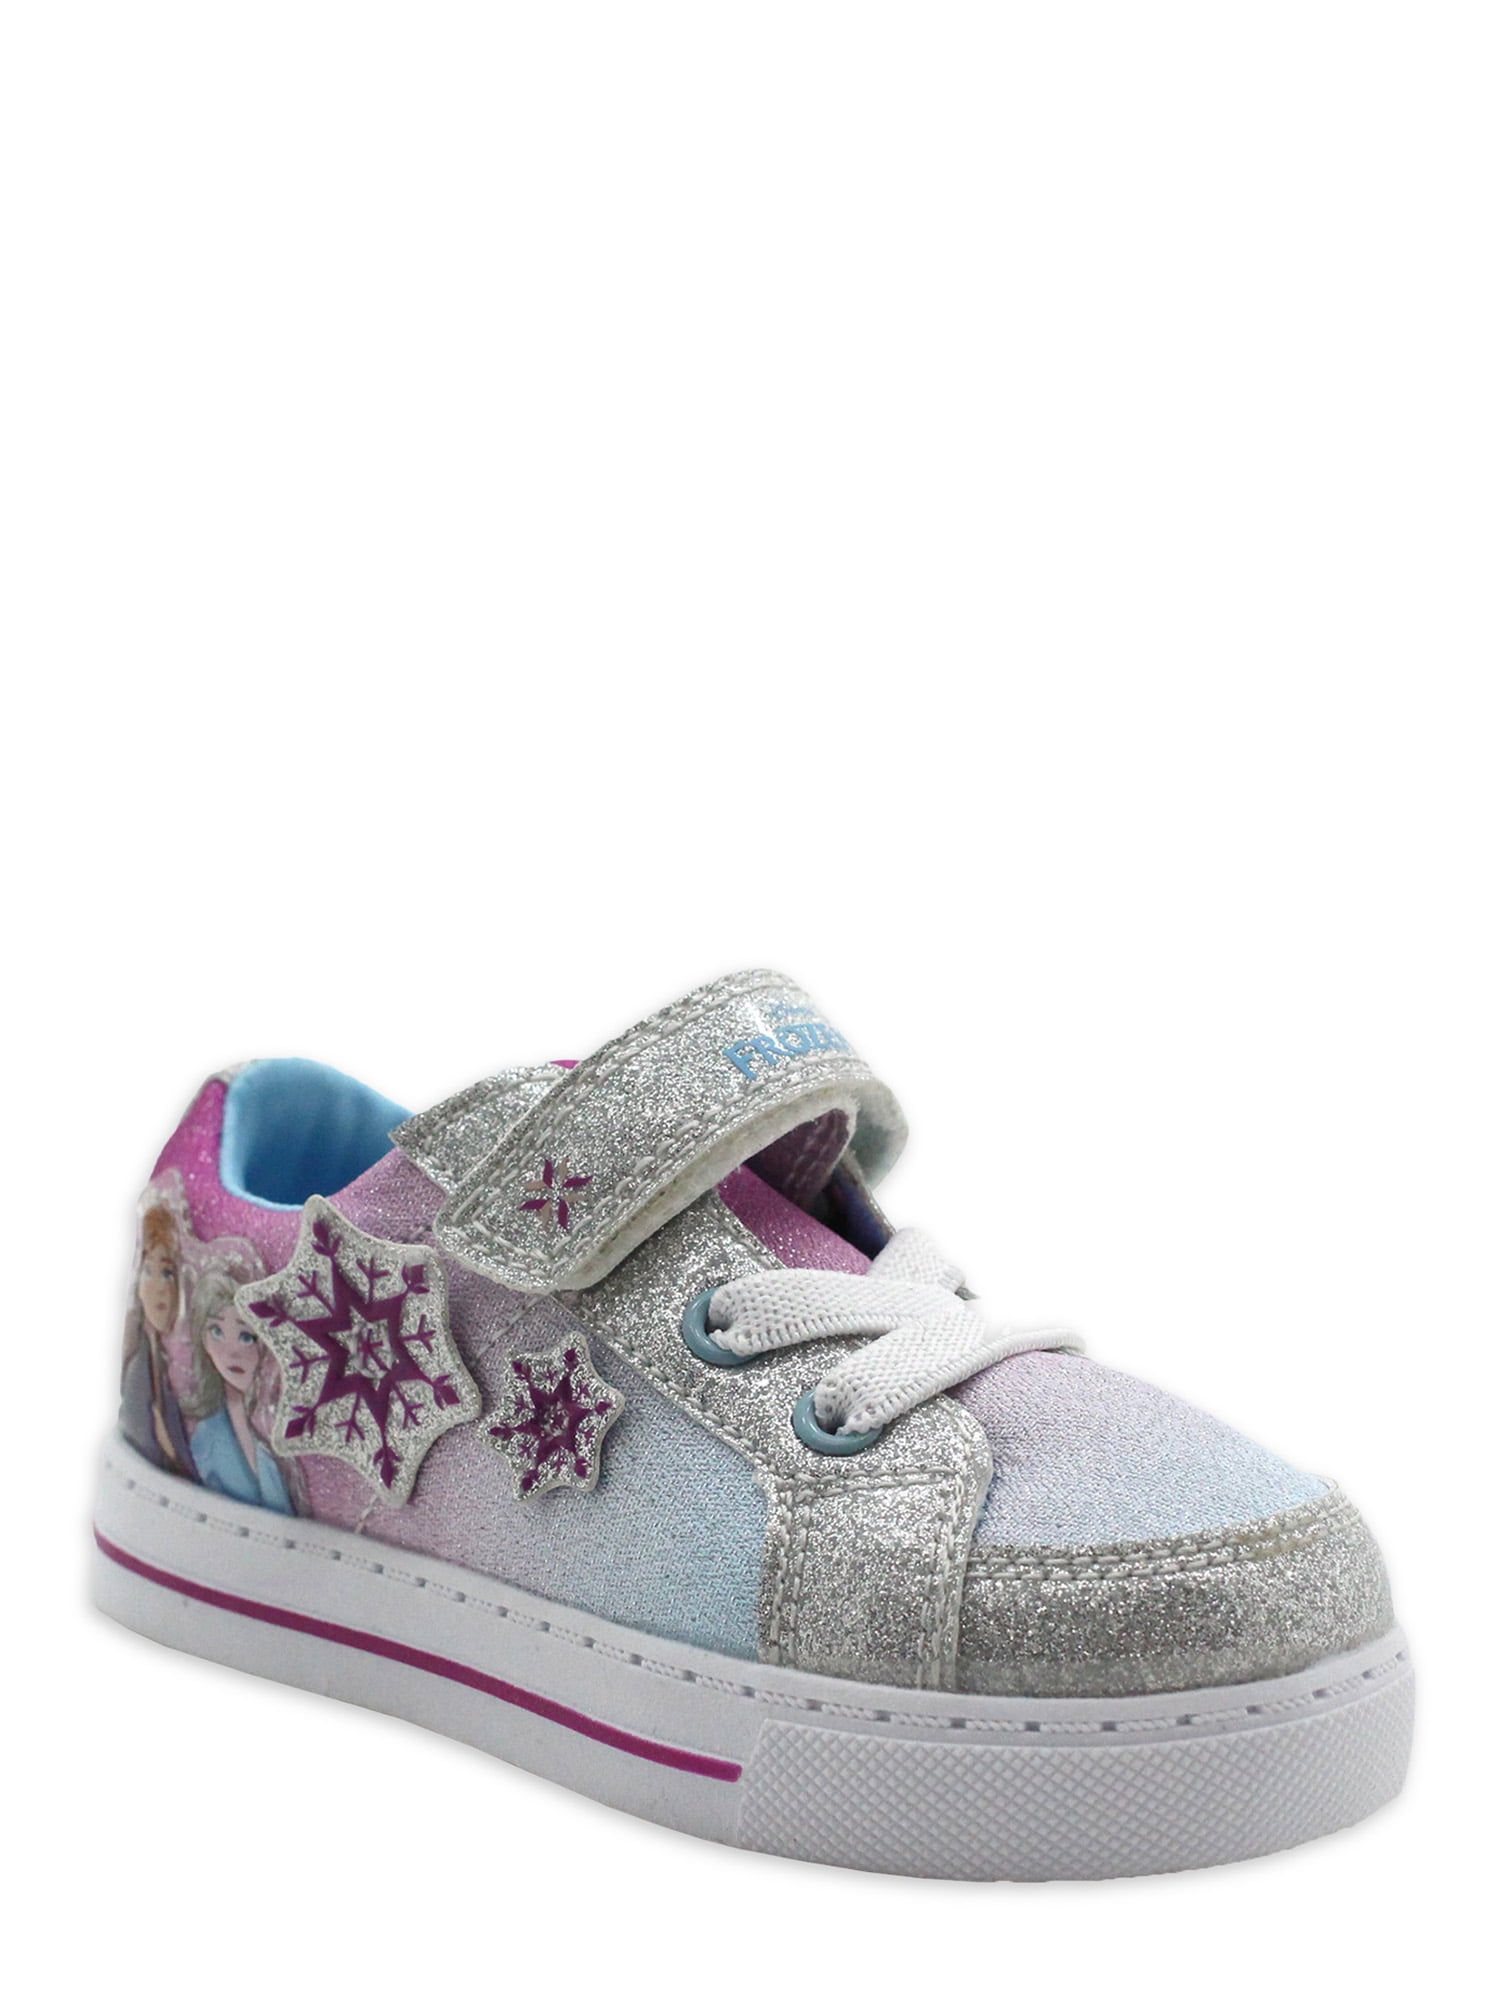 Girls Kids Shiny Glittering Touch Strap Infant Trainers Sports Casual Shoes Size 